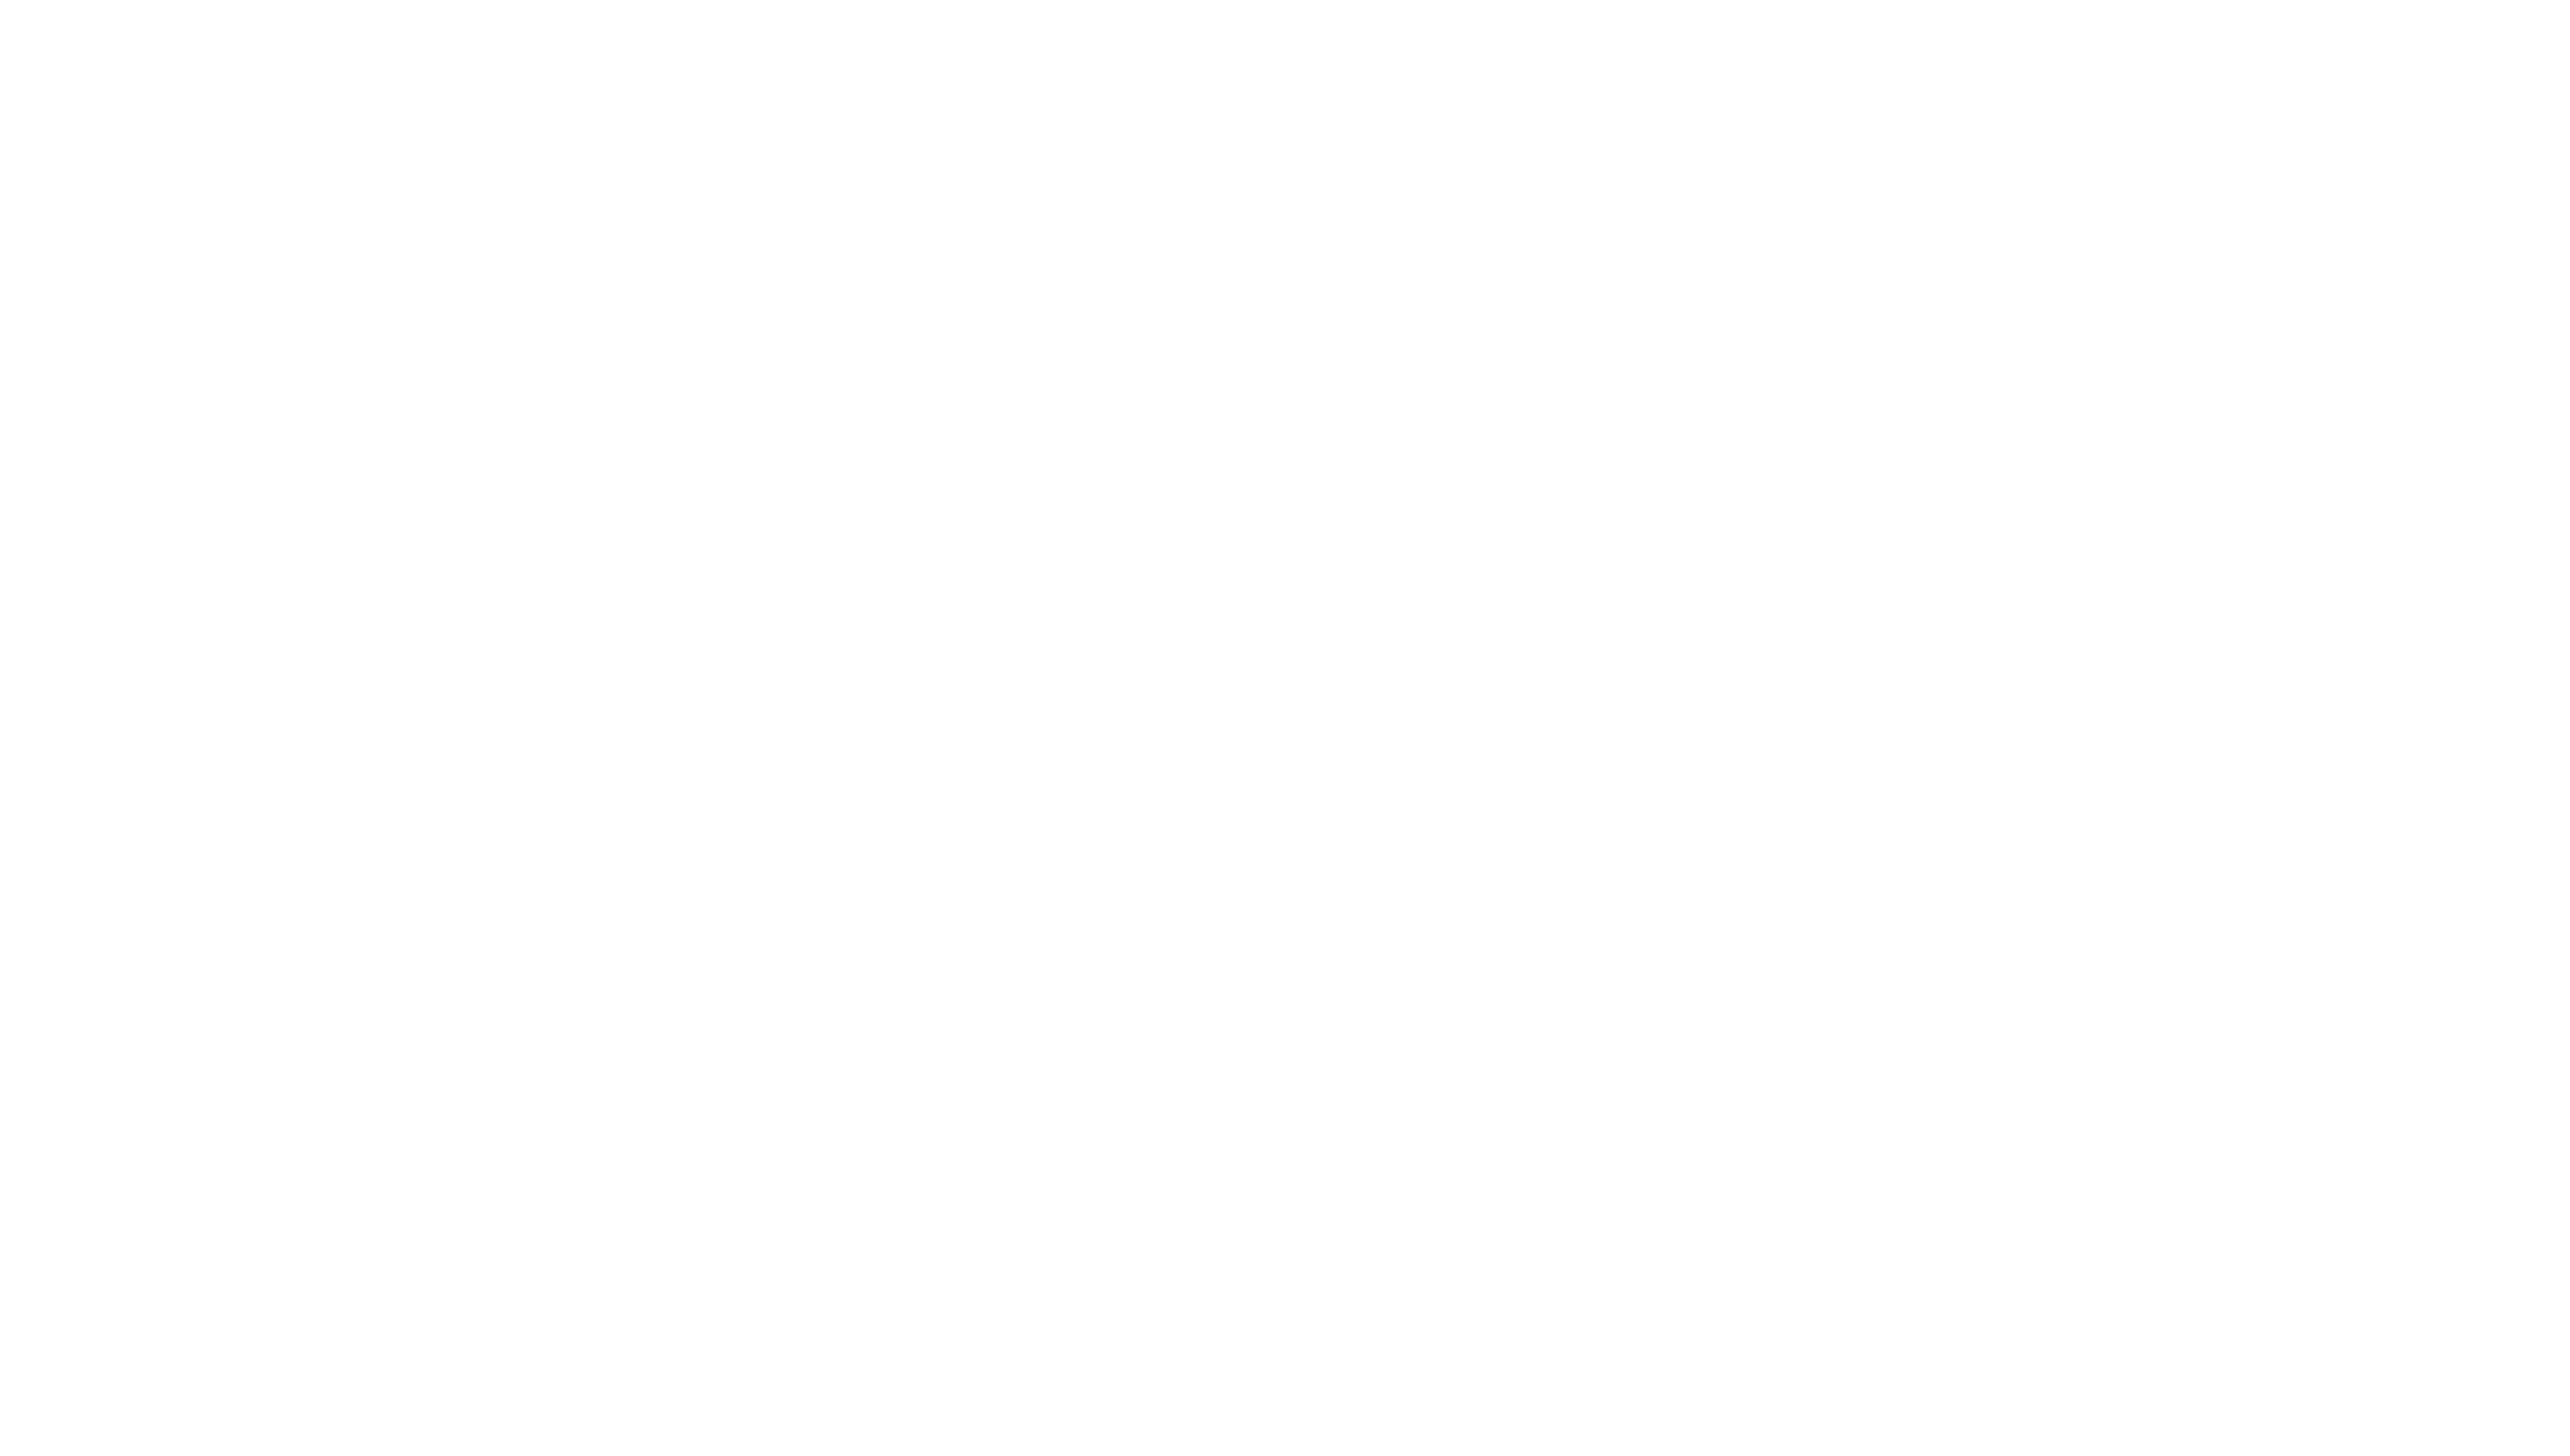 Banana Republic is a US upscale clothing and accessories retailer owned by The Gap. It was founded in 1978 by Mel and Patricia Ziegler, who originally called the company "Banana Republic Travel & Safari Clothing Company".